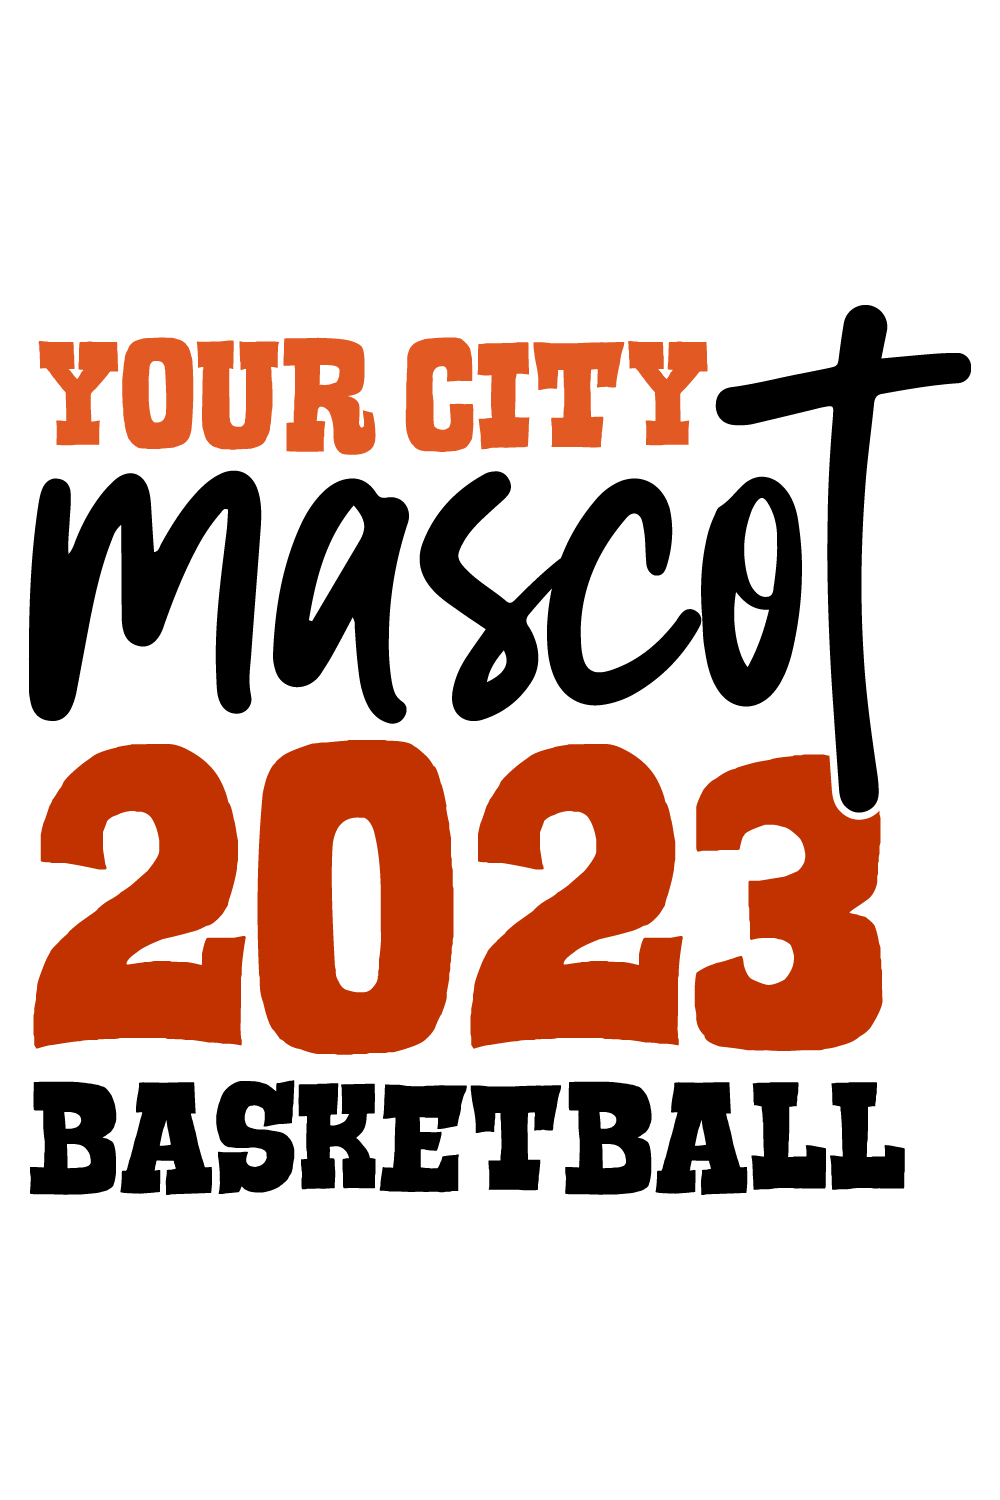 Your City Mascot 2023 Basketball pinterest preview image.